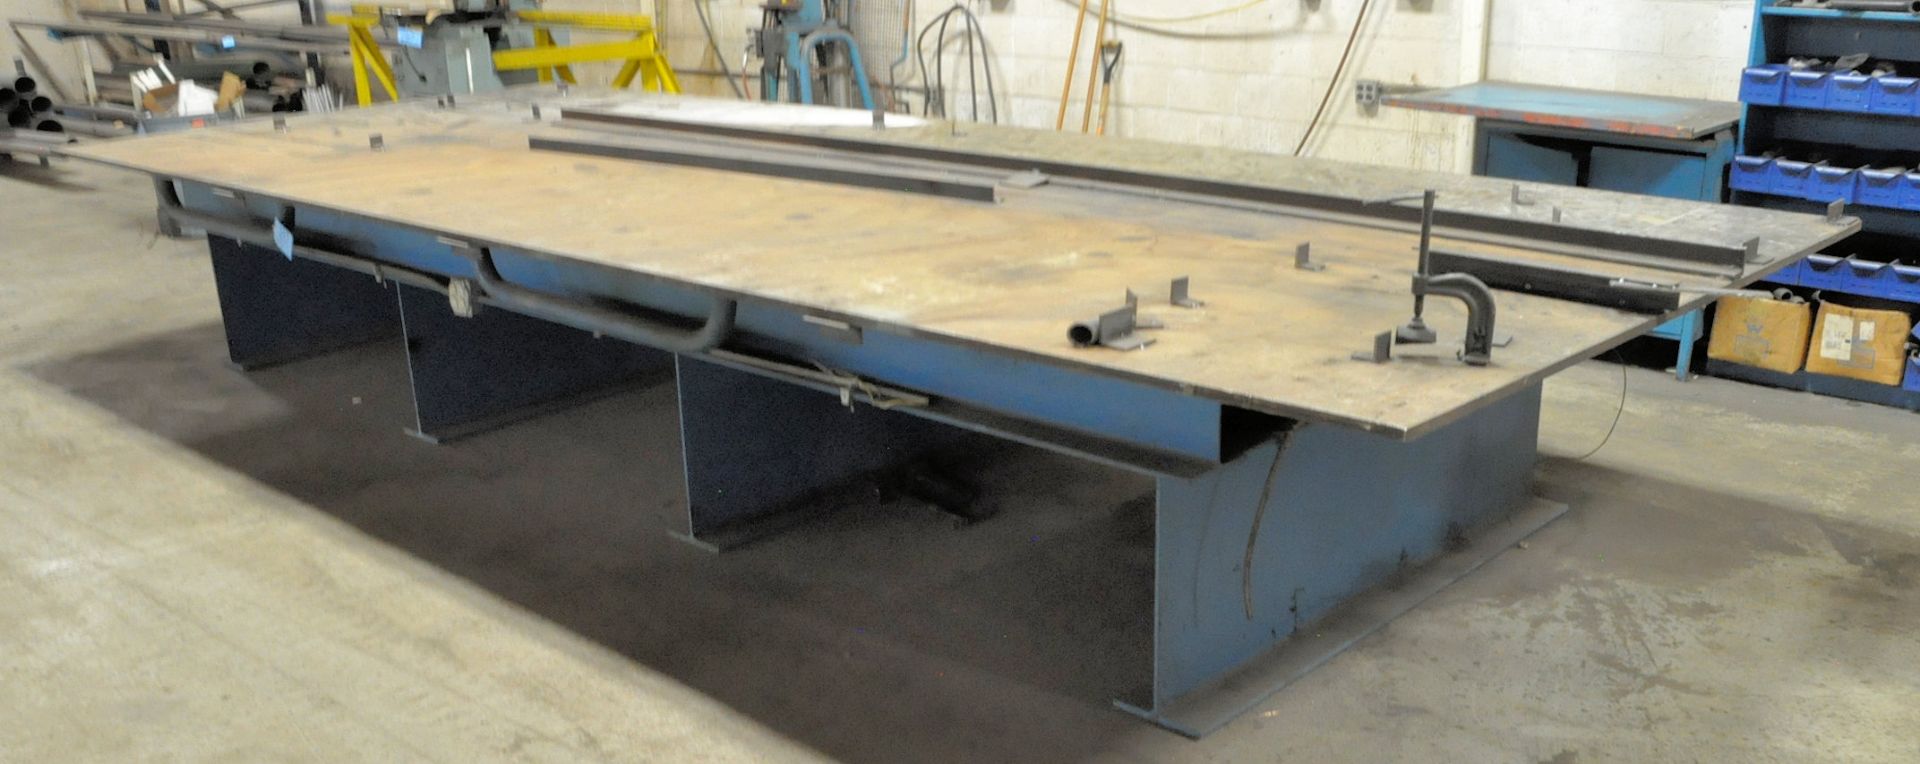 240" L x 96" W x 35" H x 1" Thick Steel Welding Table